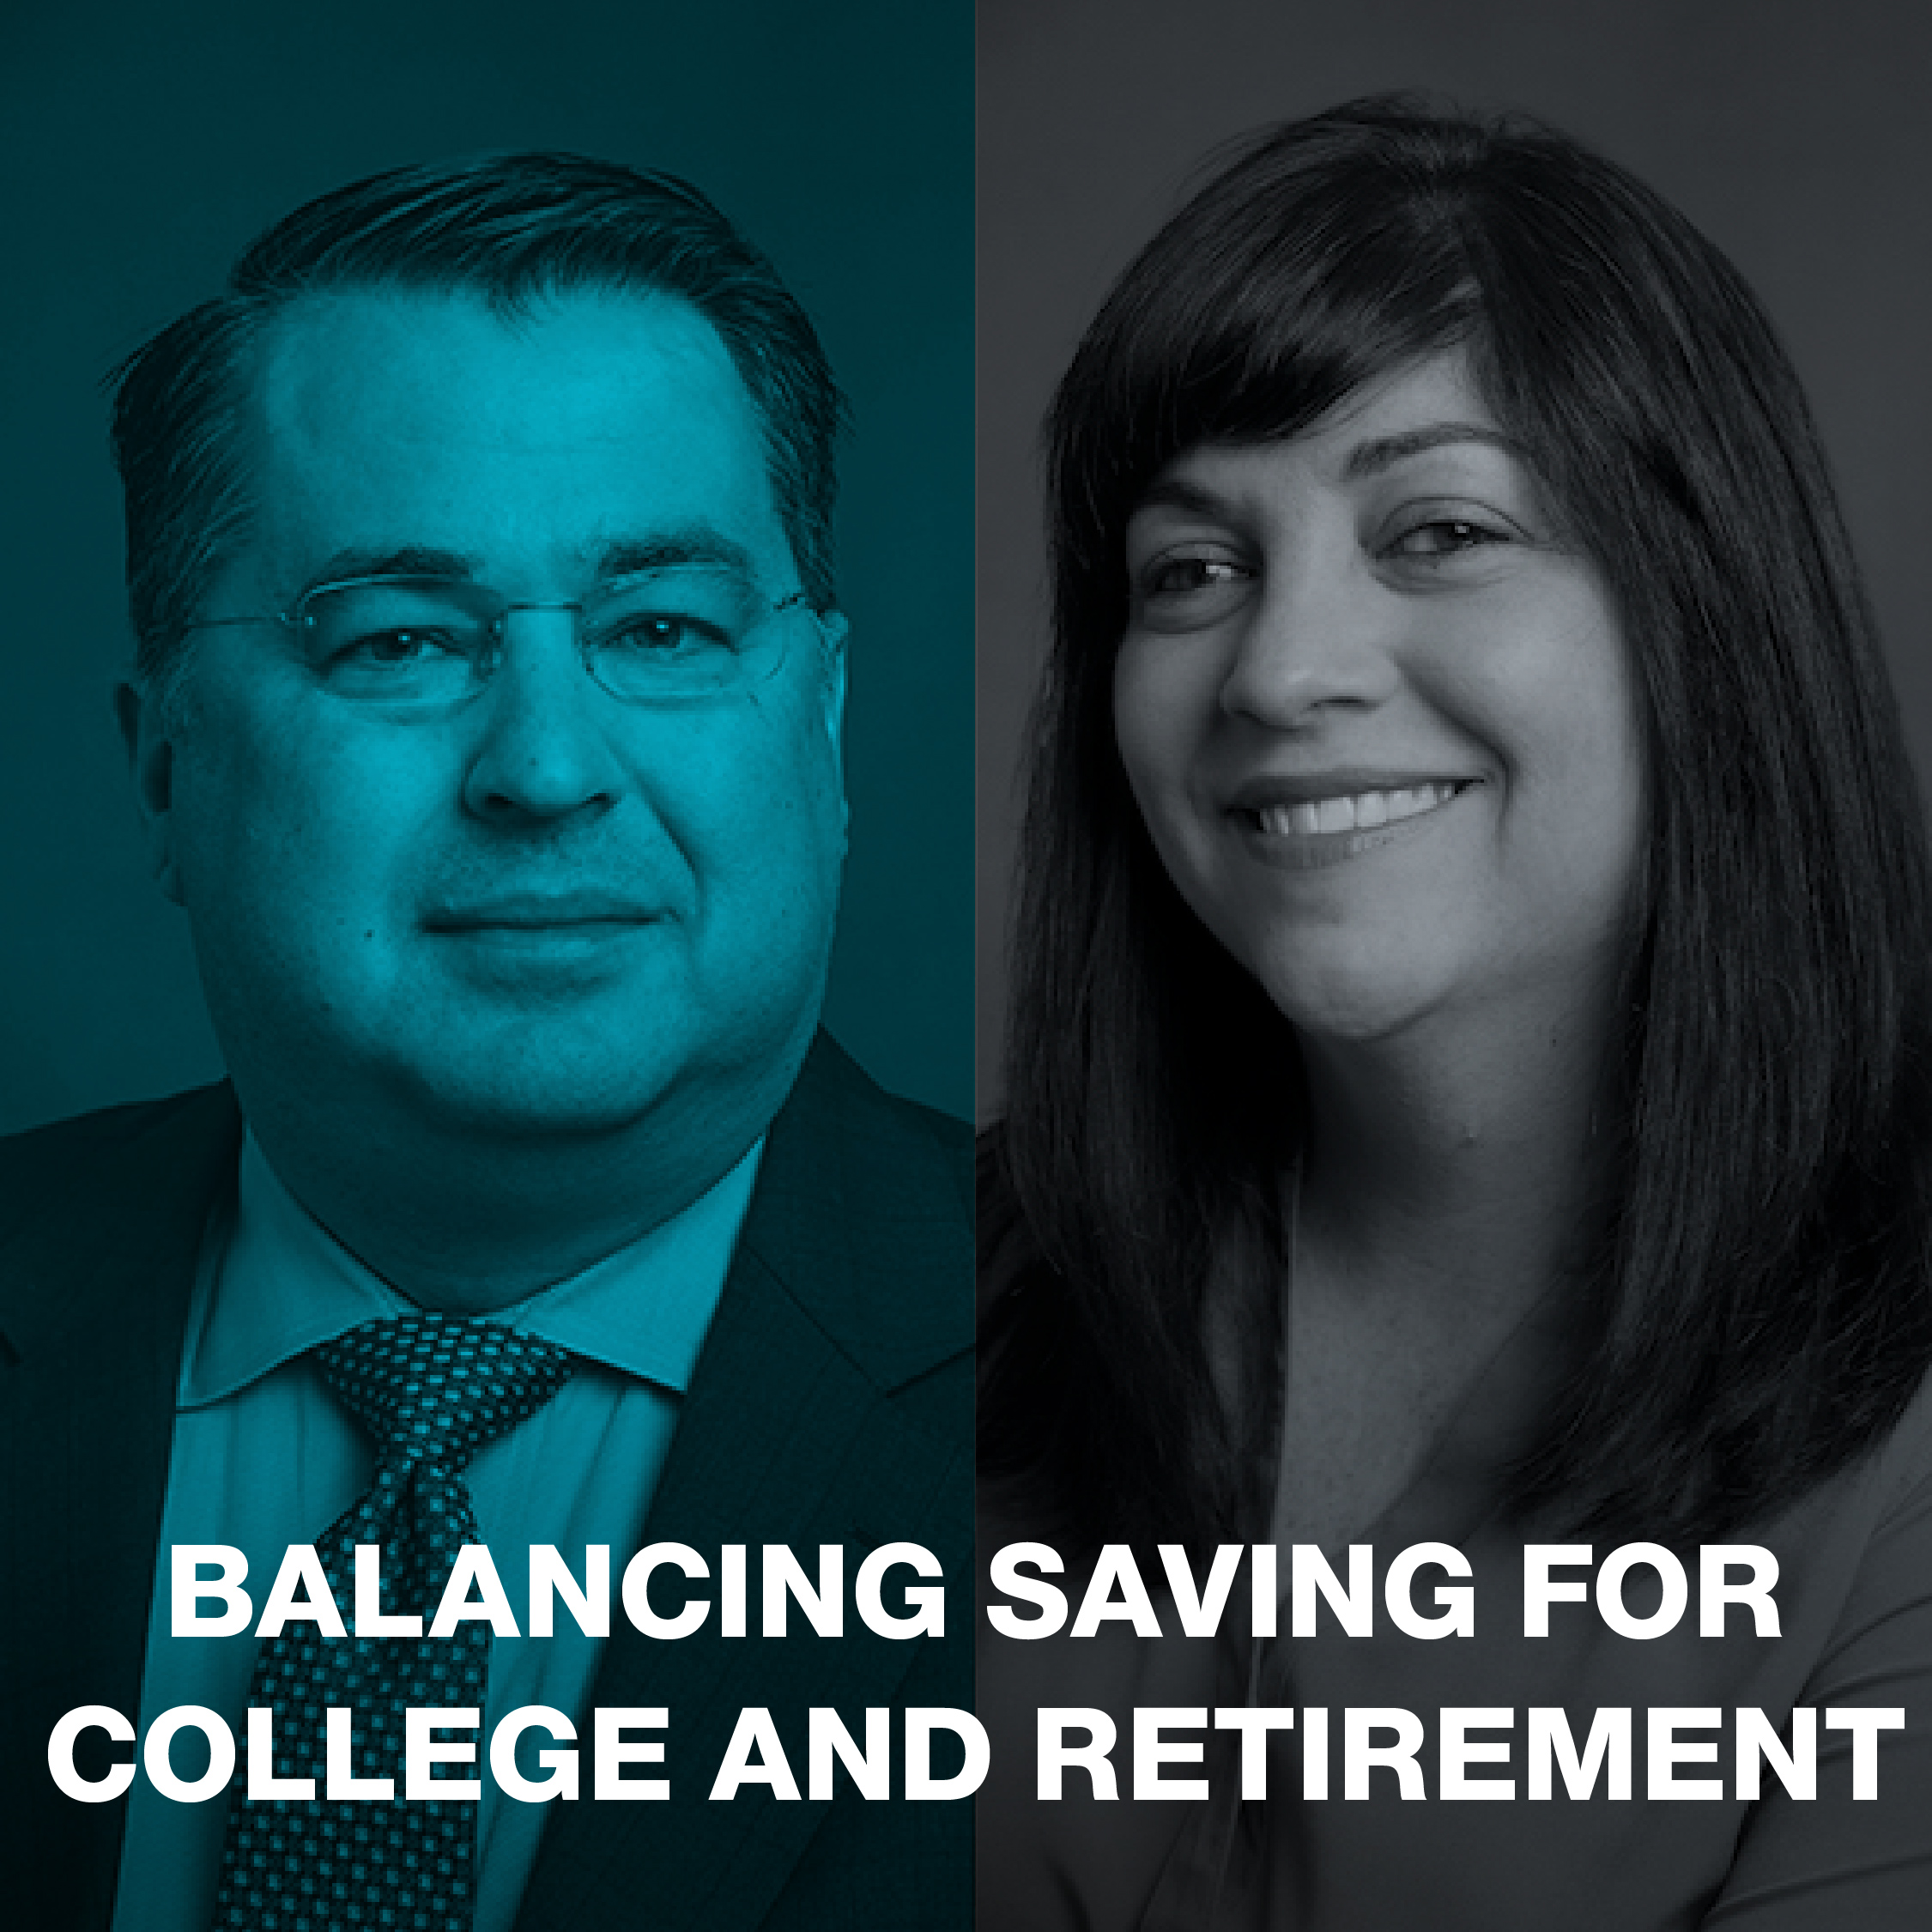 Balancing saving for college and retirement